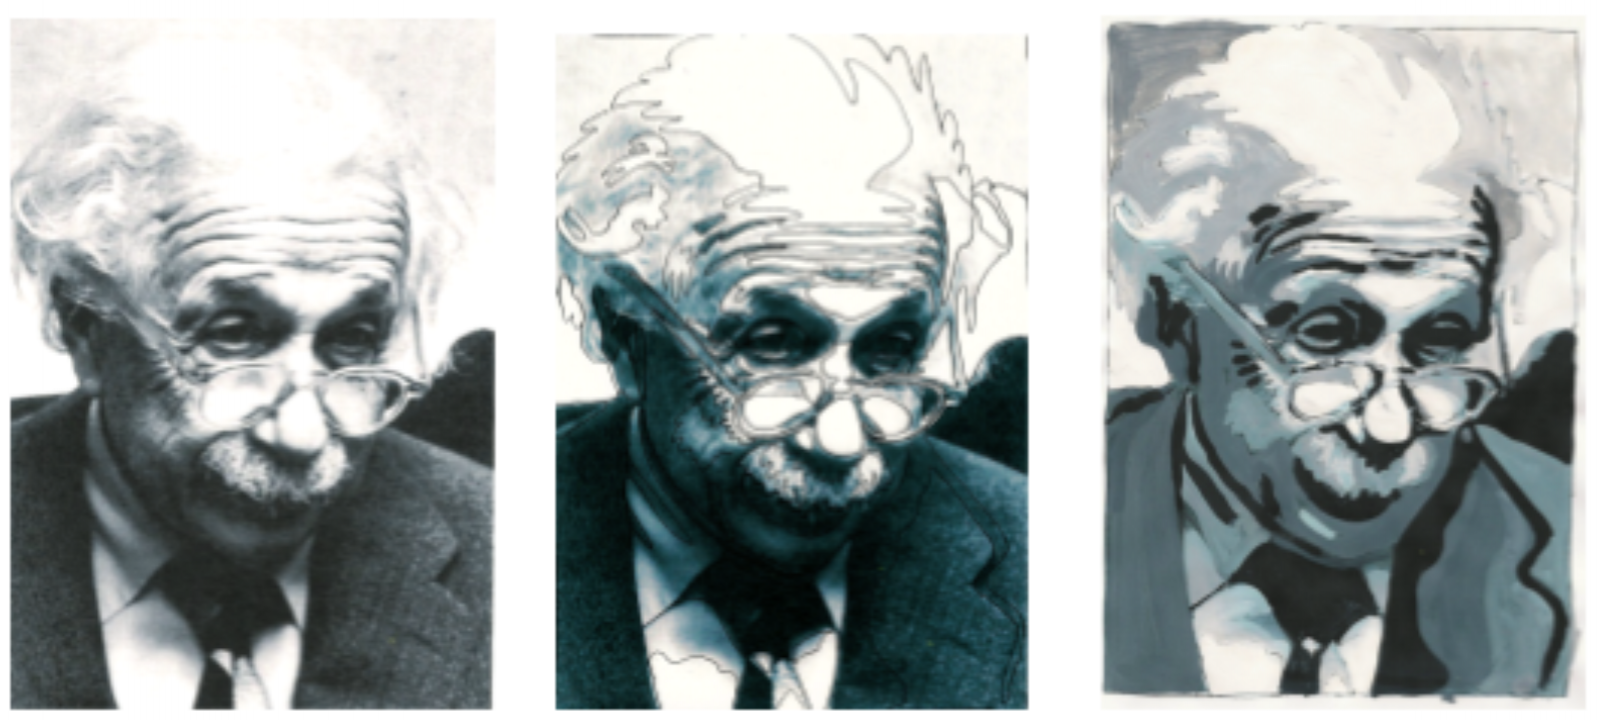 Einstein photo painted over as value study